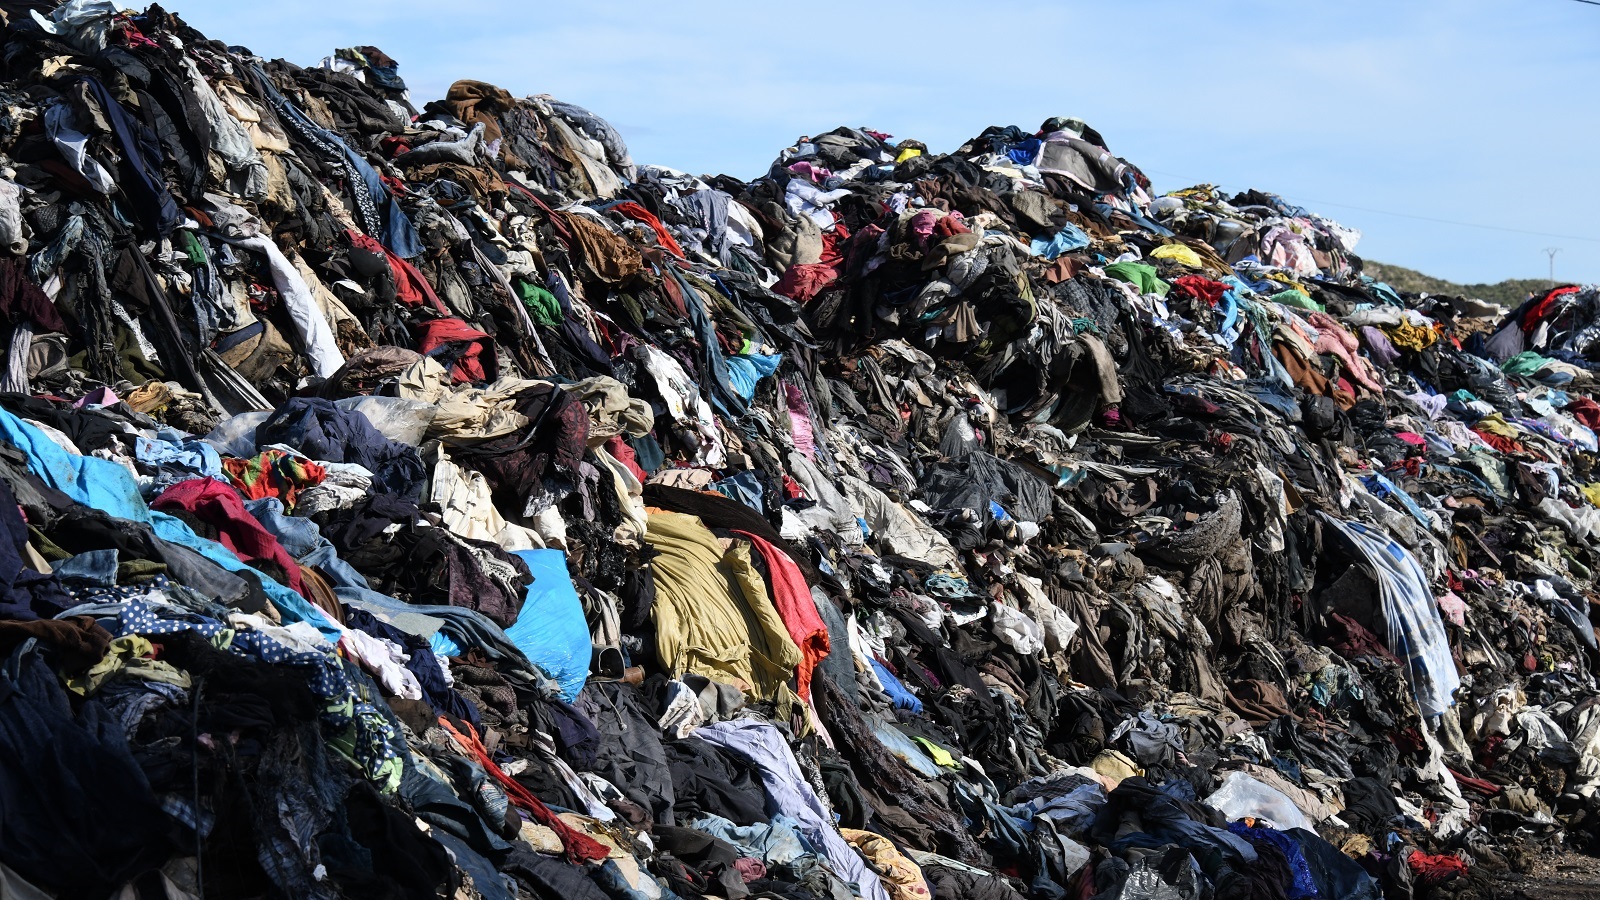 Fashion's growing interest in recycling clothing